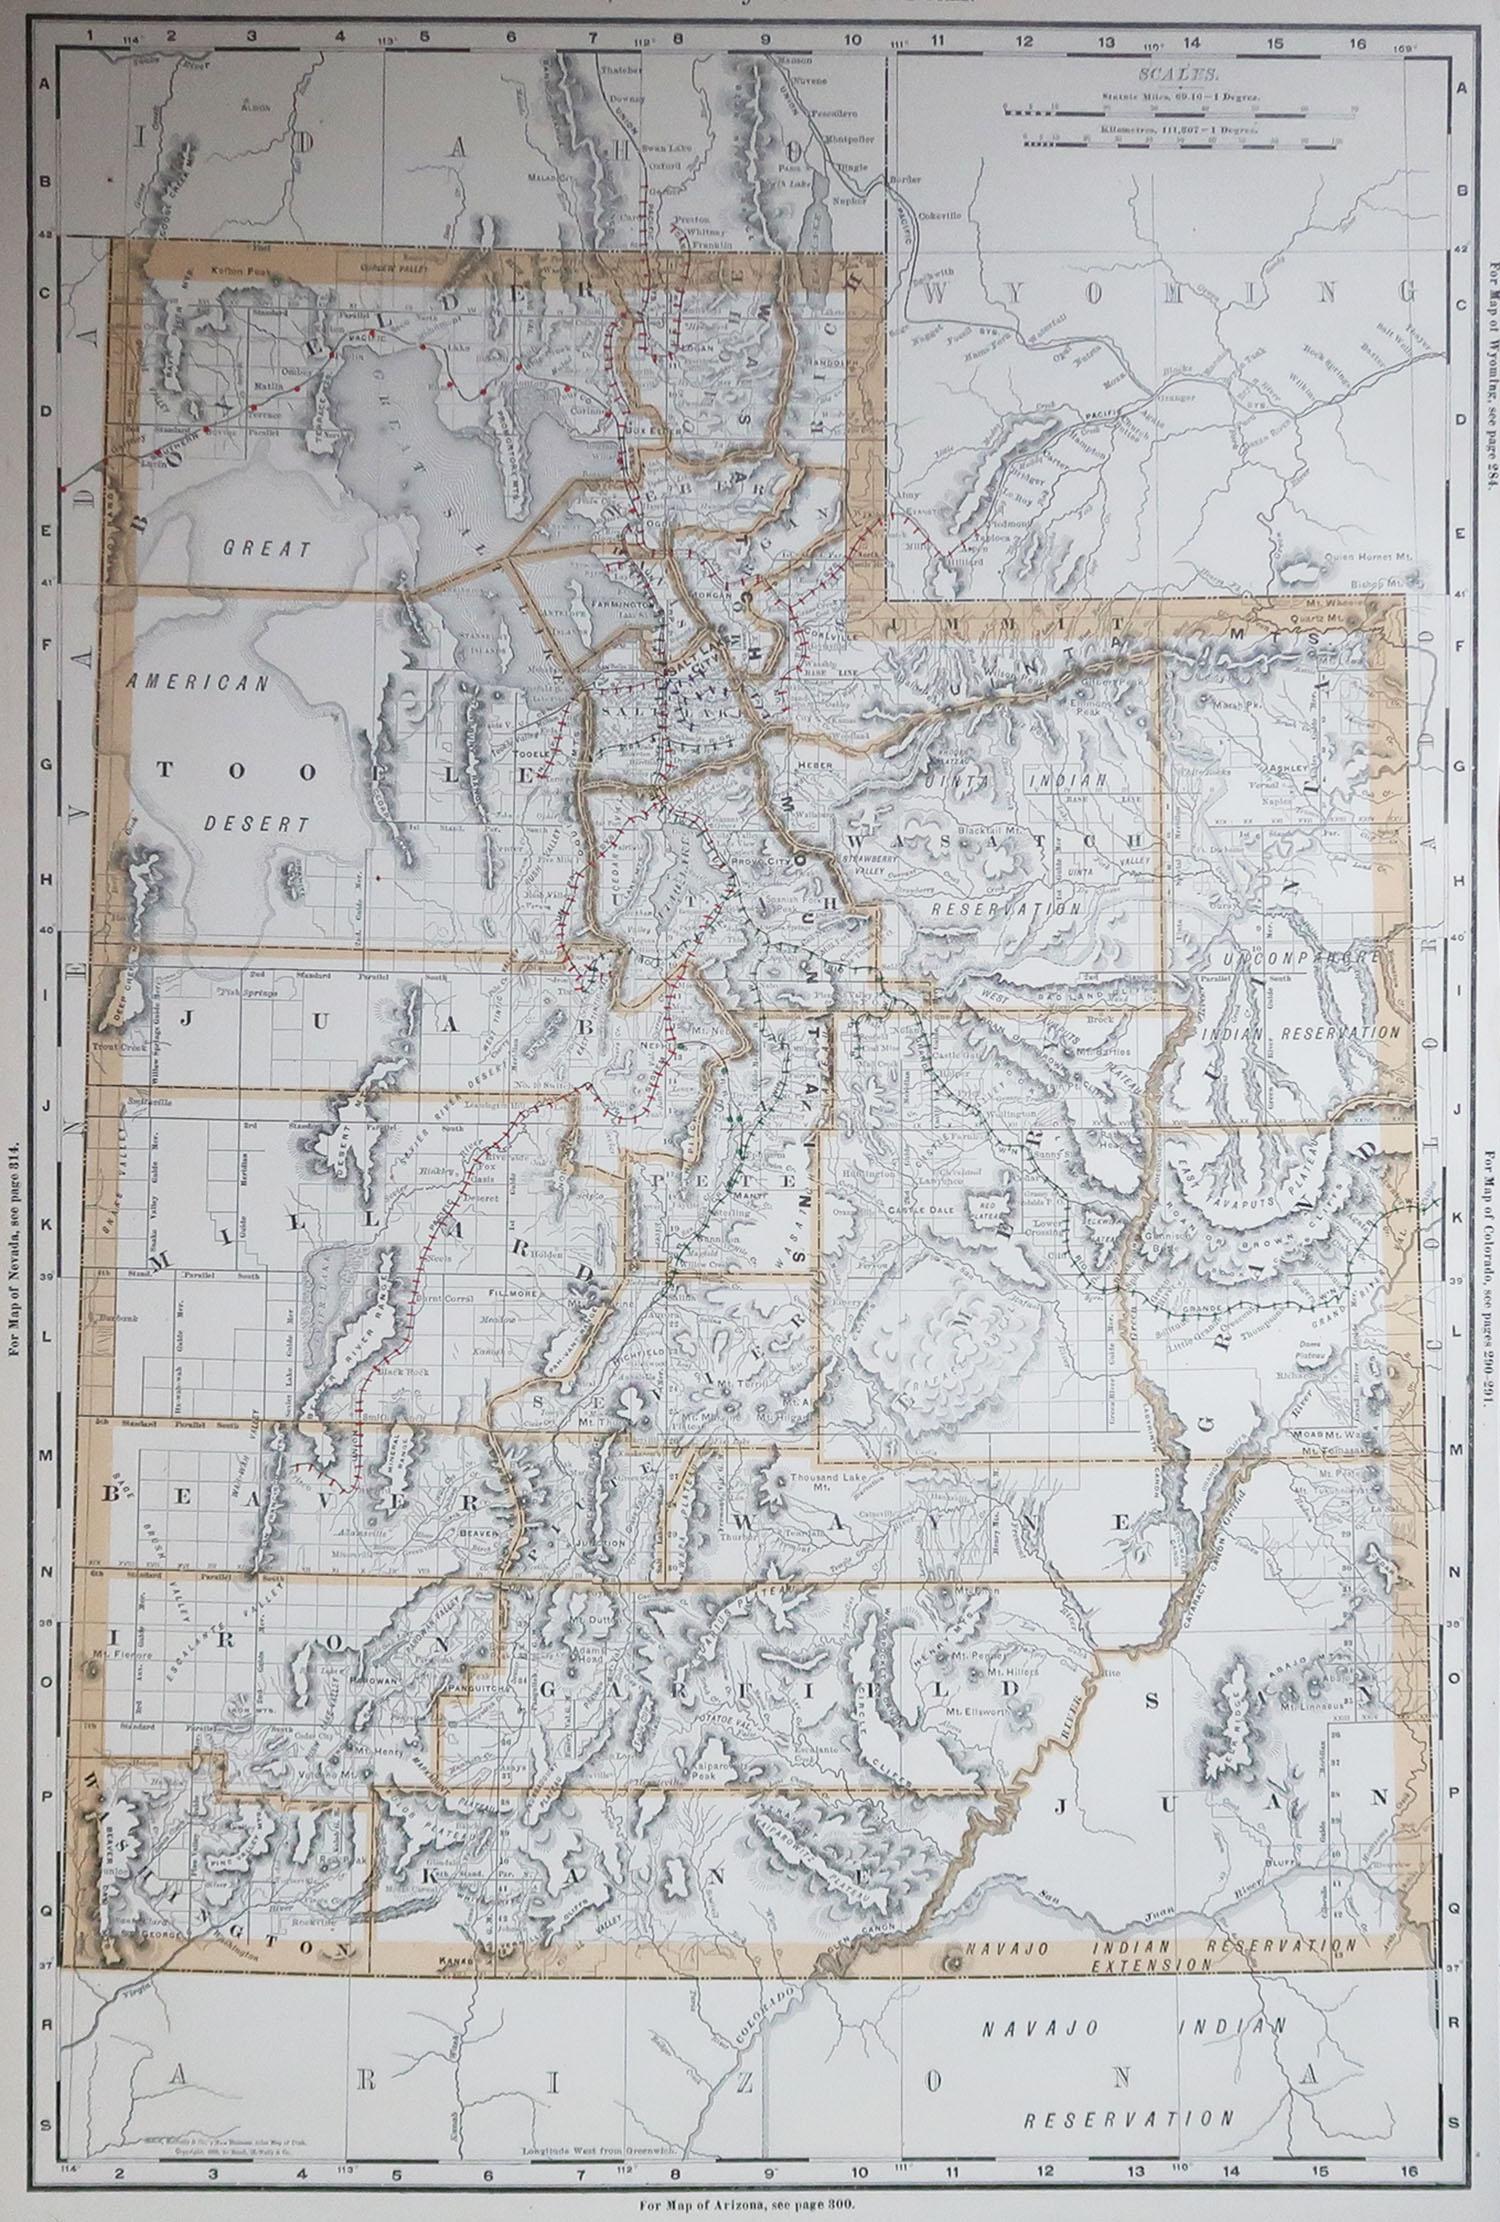 Fabulous map of Utah

Original color

By Rand, McNally & Co.

Published, 1894

Unframed

Free shipping.